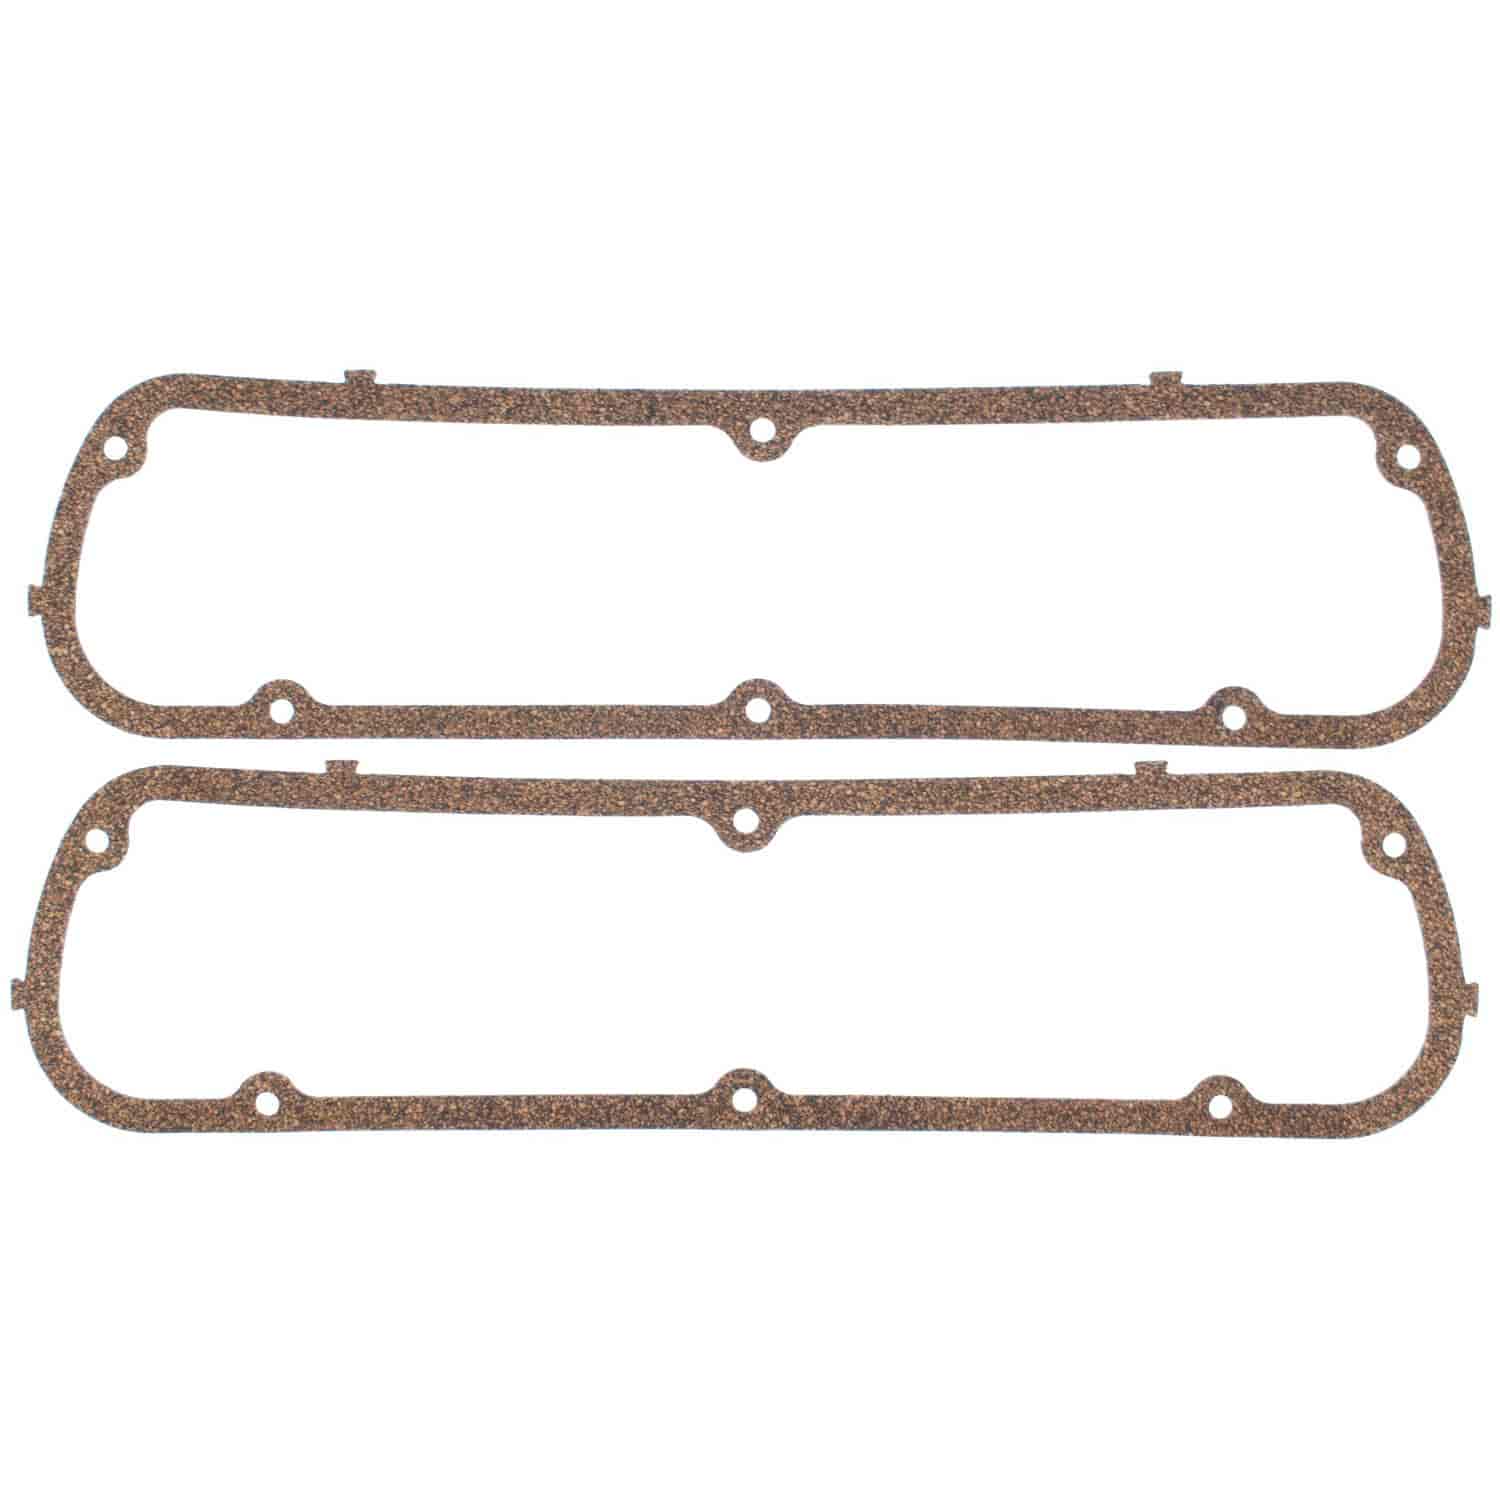 Valve Cover Gasket Set 1962-2001 Small Block Ford 221/255/260/289/302/351W (3.6/4.2/4.3/4.7/5.0/5.8L) in Cork Rubber